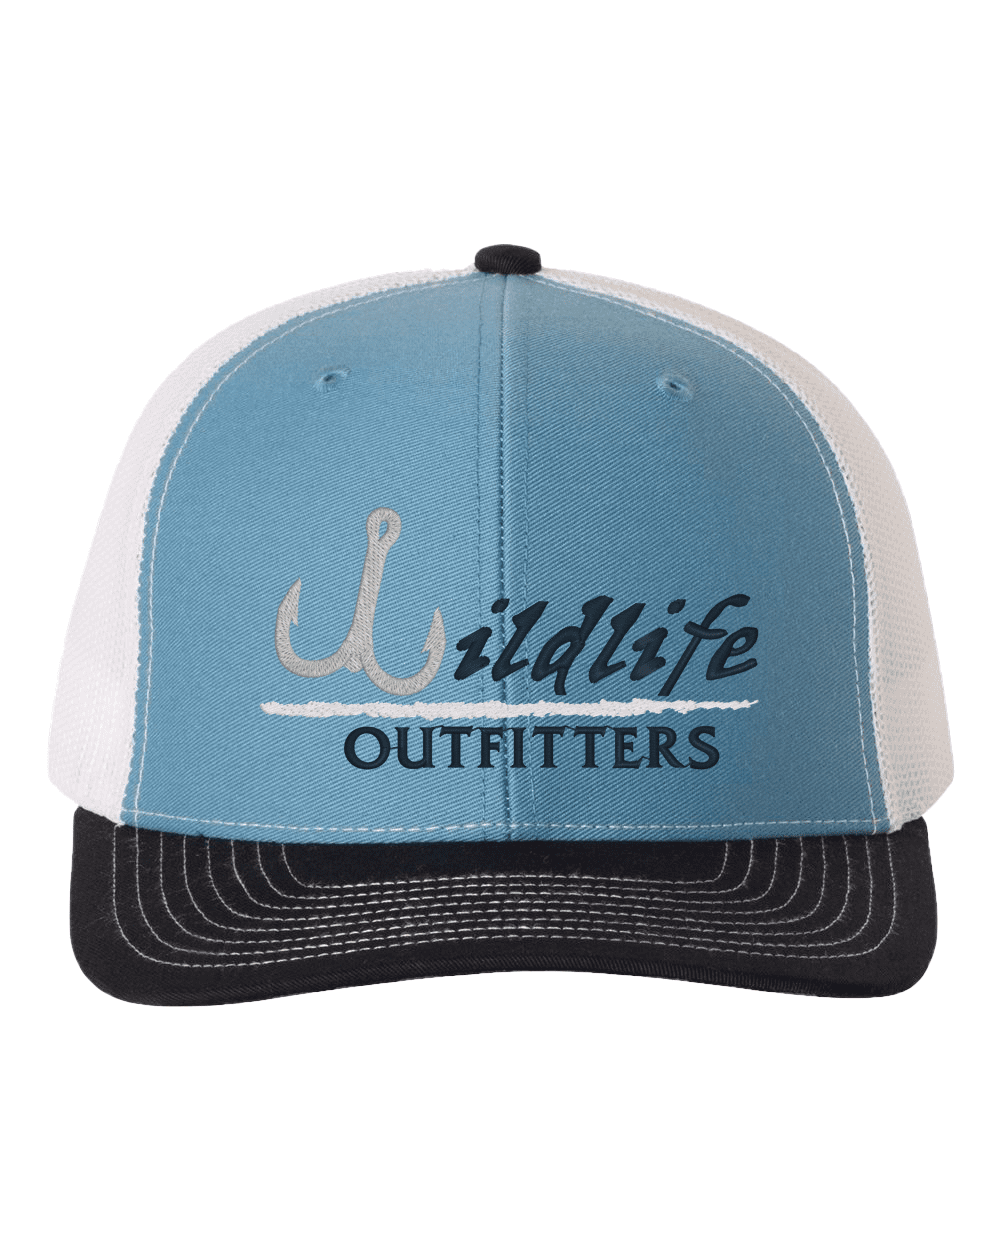 https://wildlifeoutfitters.com/wp-content/uploads/Columbia-White-Navy-112-Fishing.png